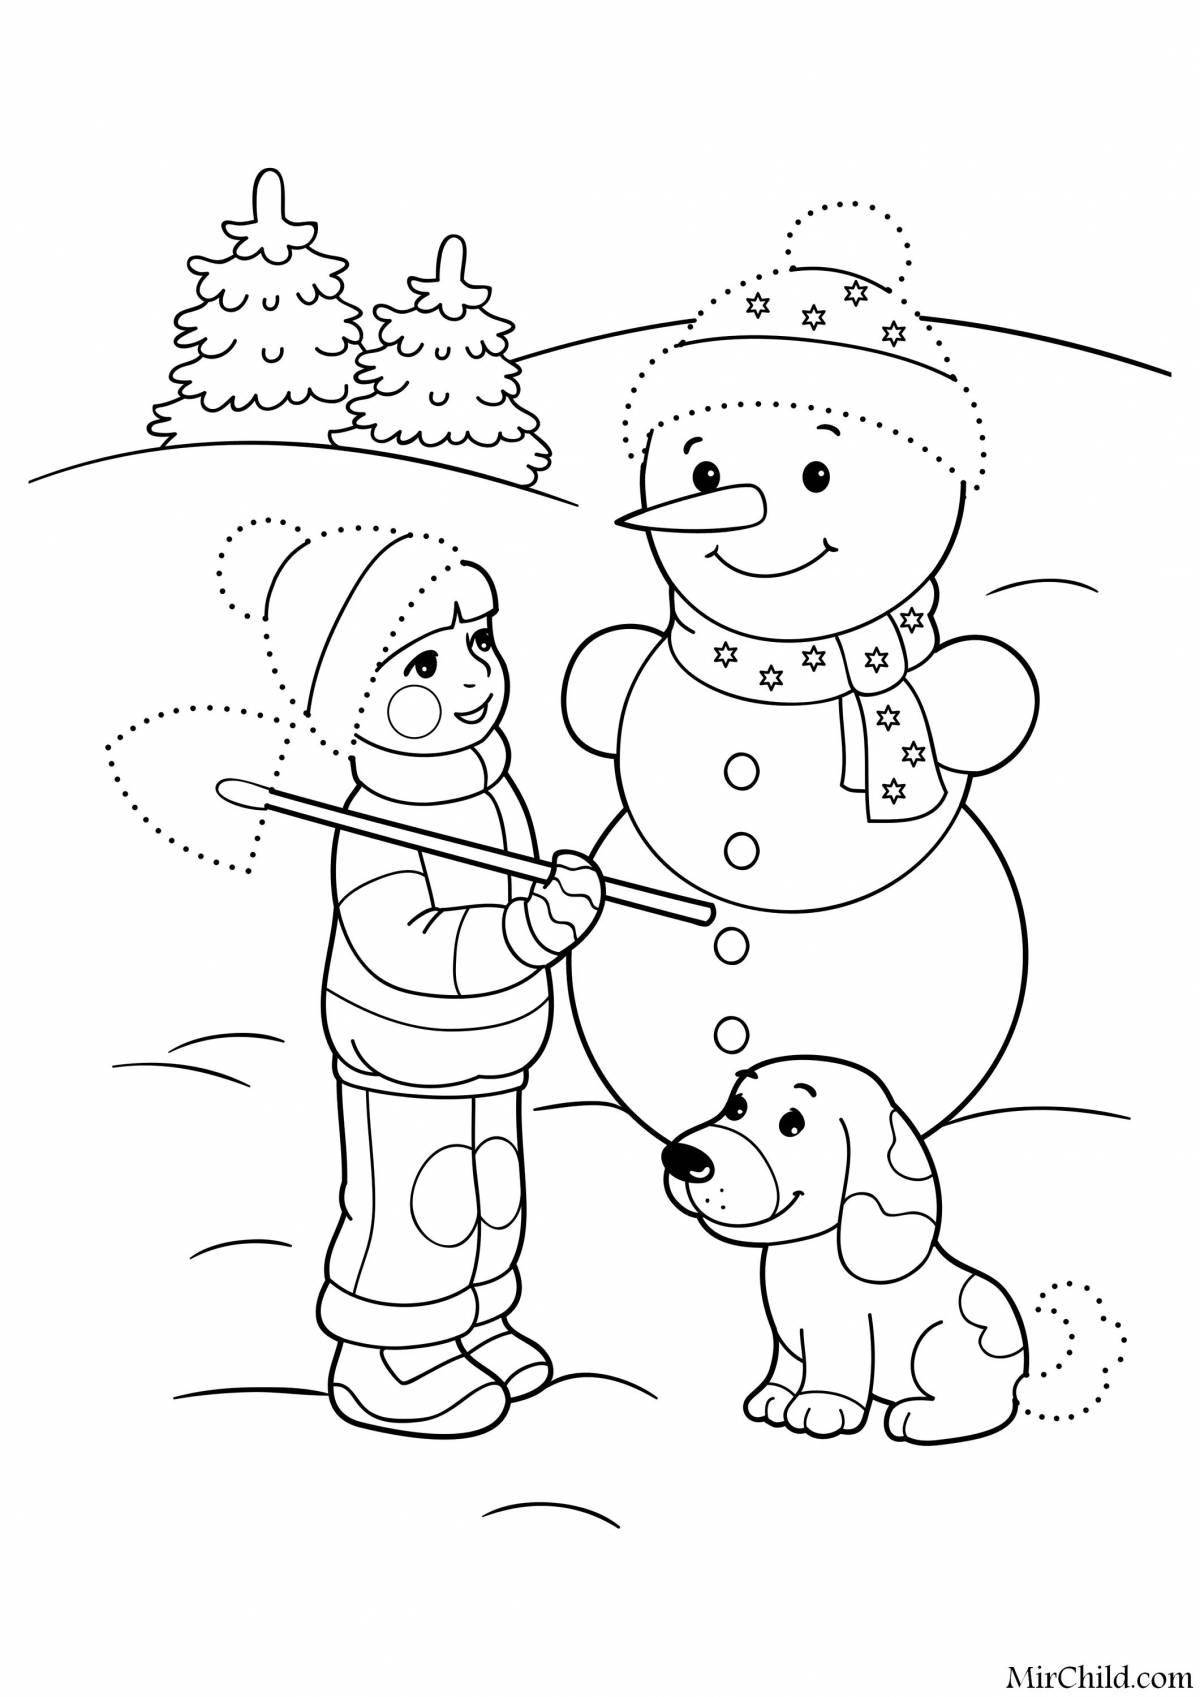 Holiday snowman coloring book for children 6-7 years old